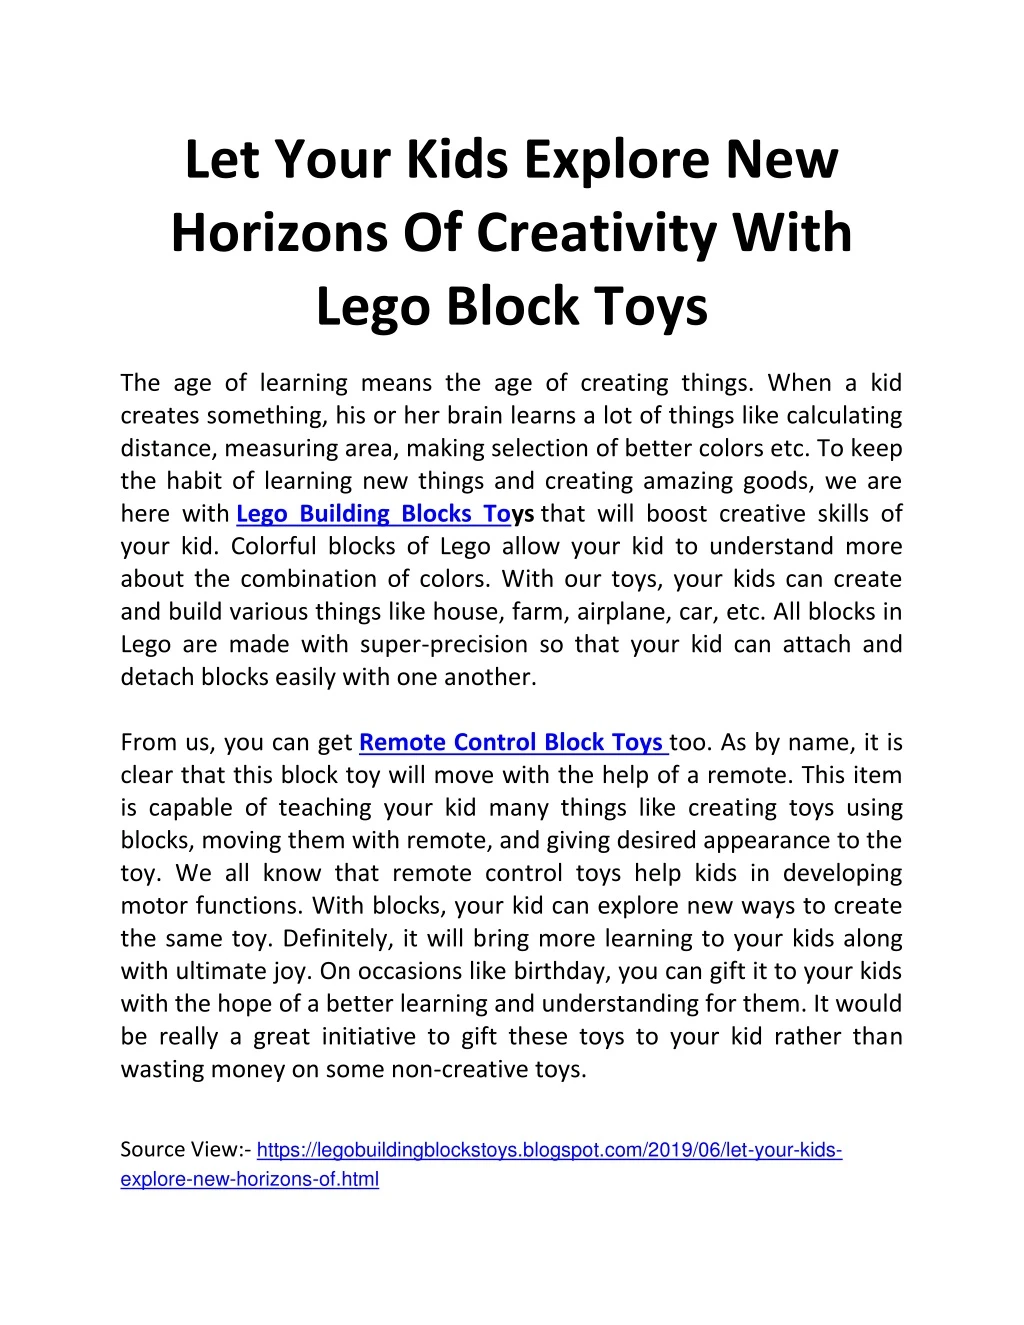 let your kids explore new horizons of creativity